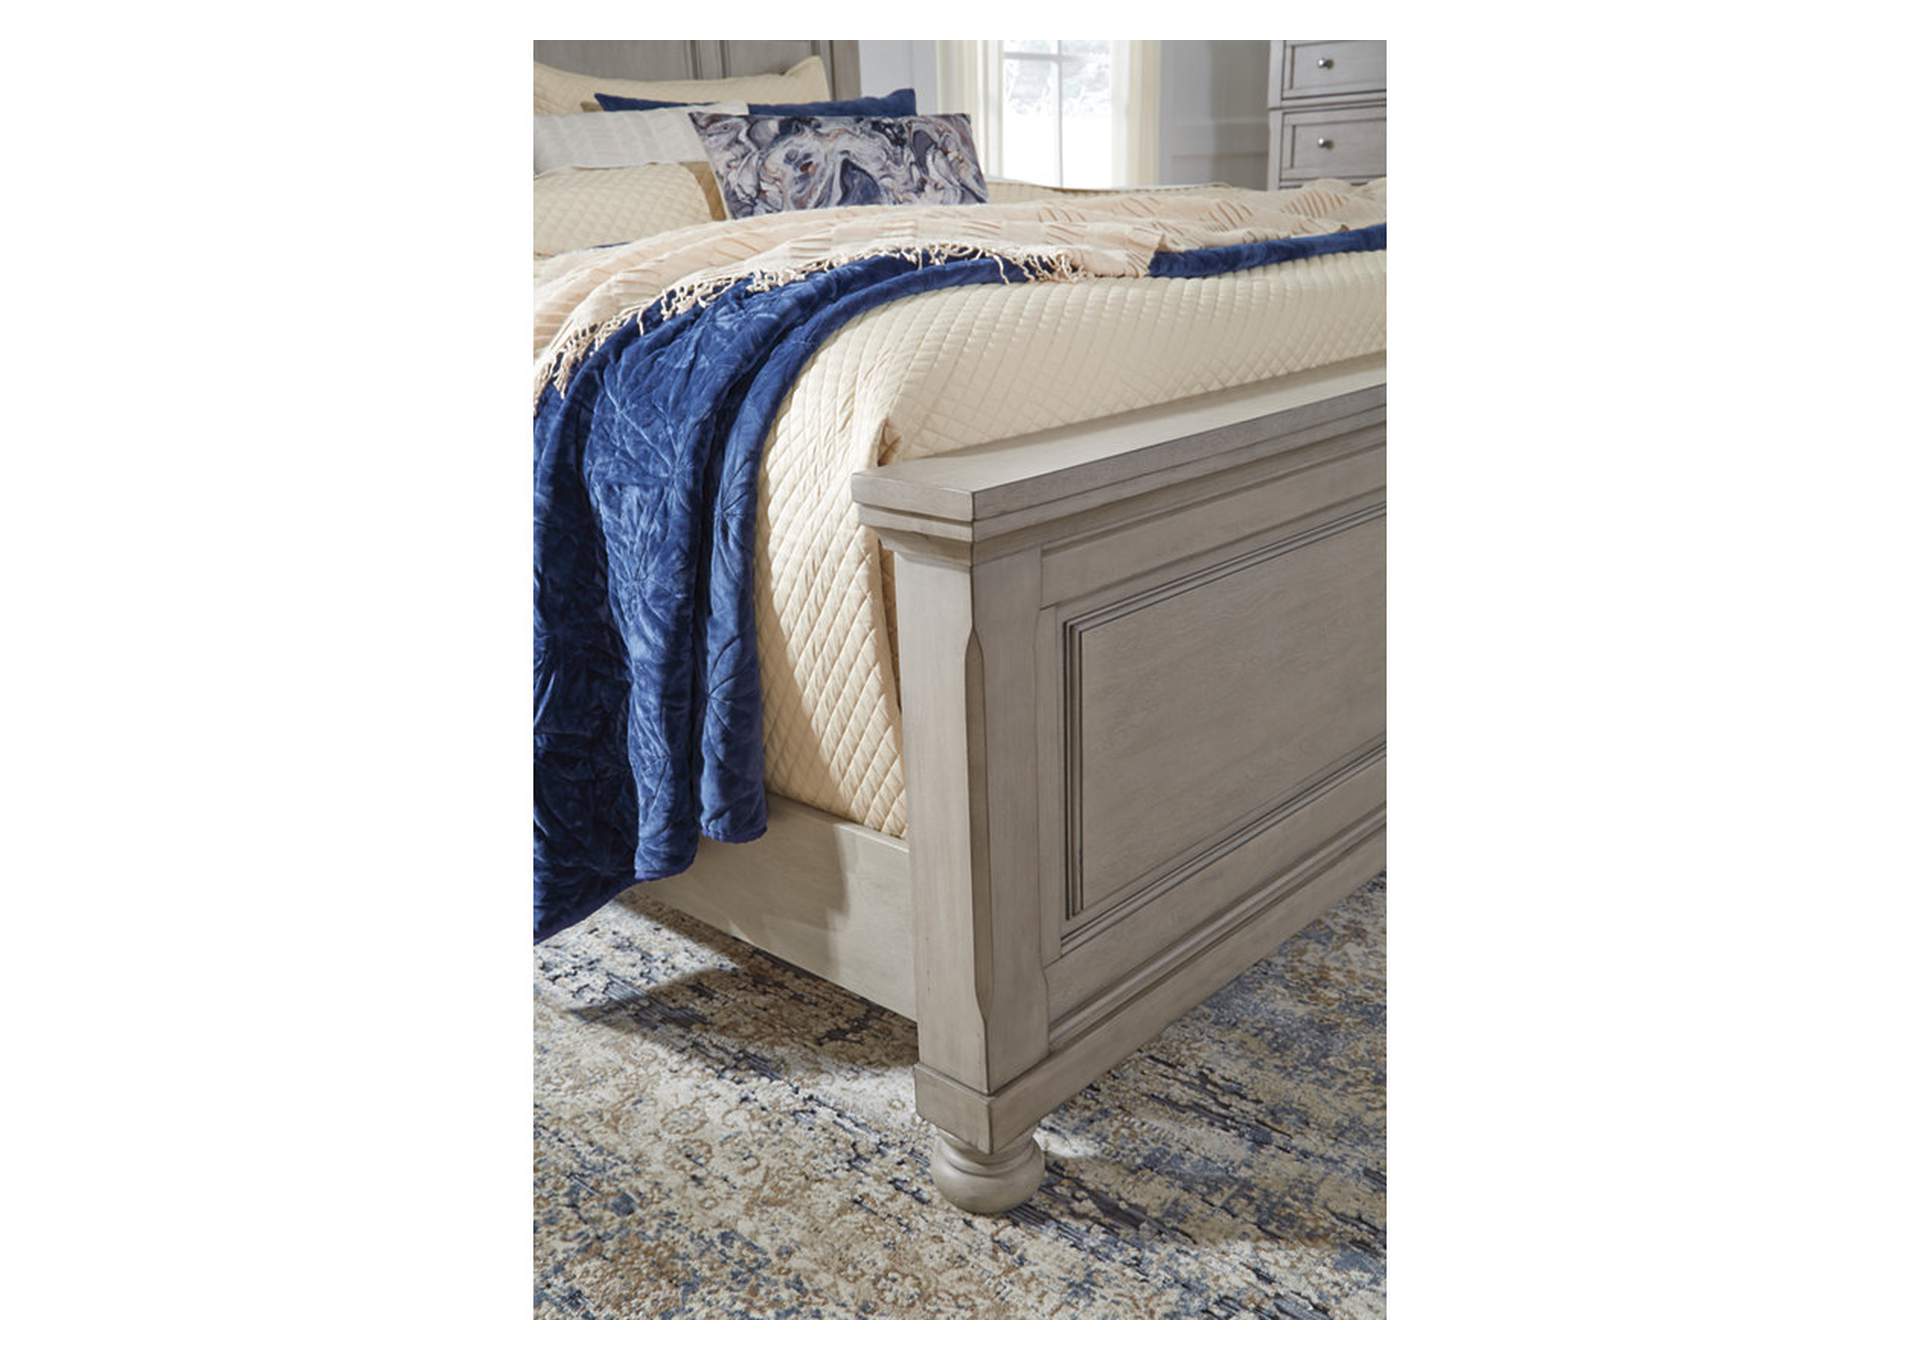 Lettner Queen Panel Bed,Signature Design By Ashley